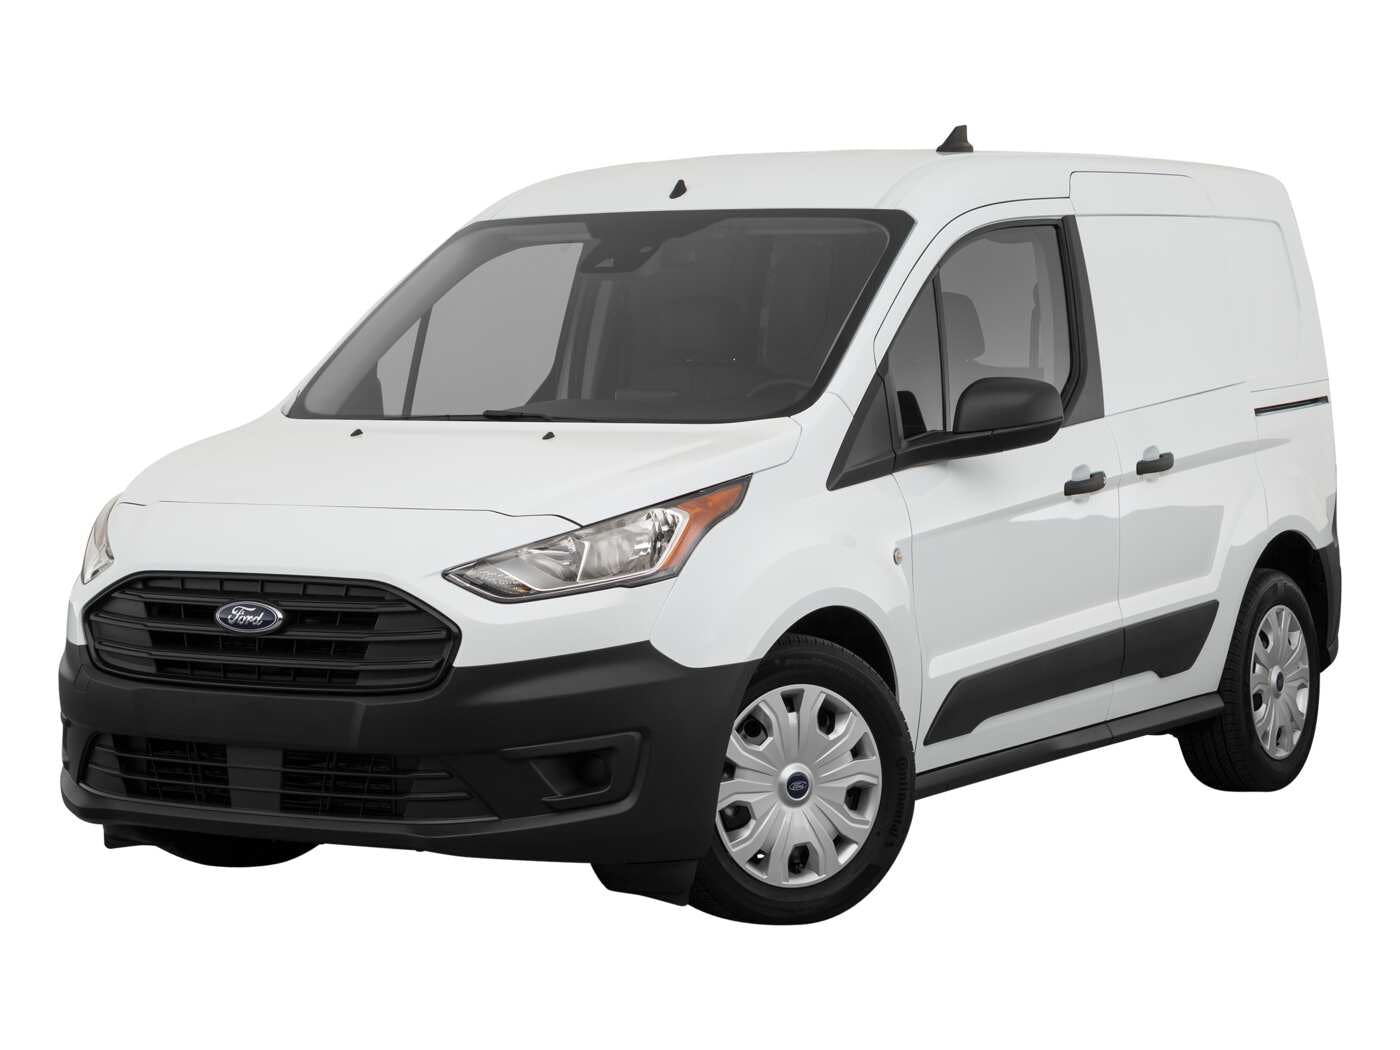 small delivery vans for sale